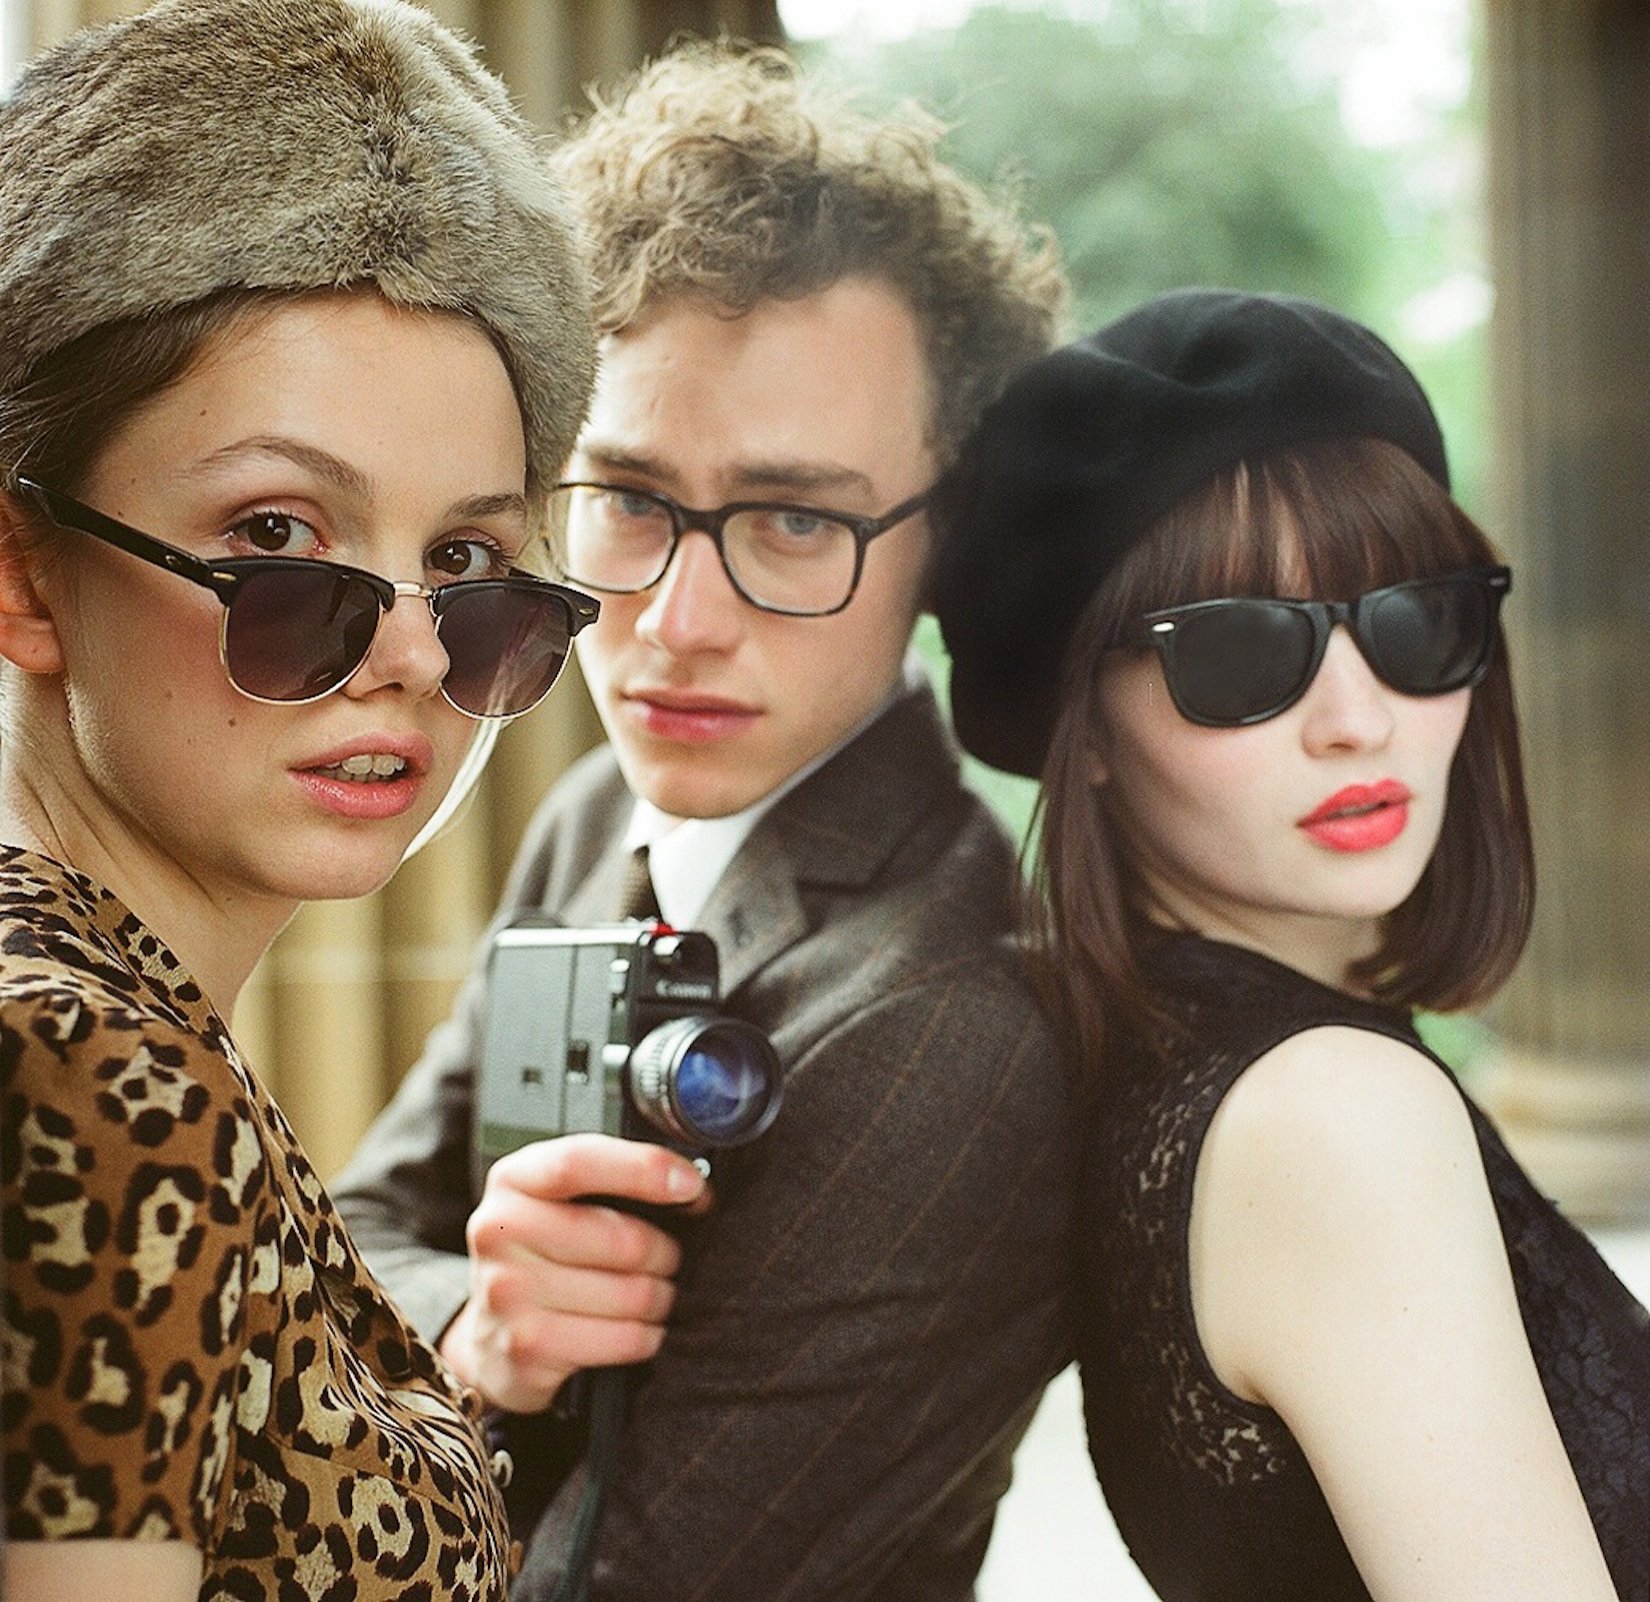 Still of Emily Browning, Hannah Murray and Olly Alexander in God Help the Girl (2014)